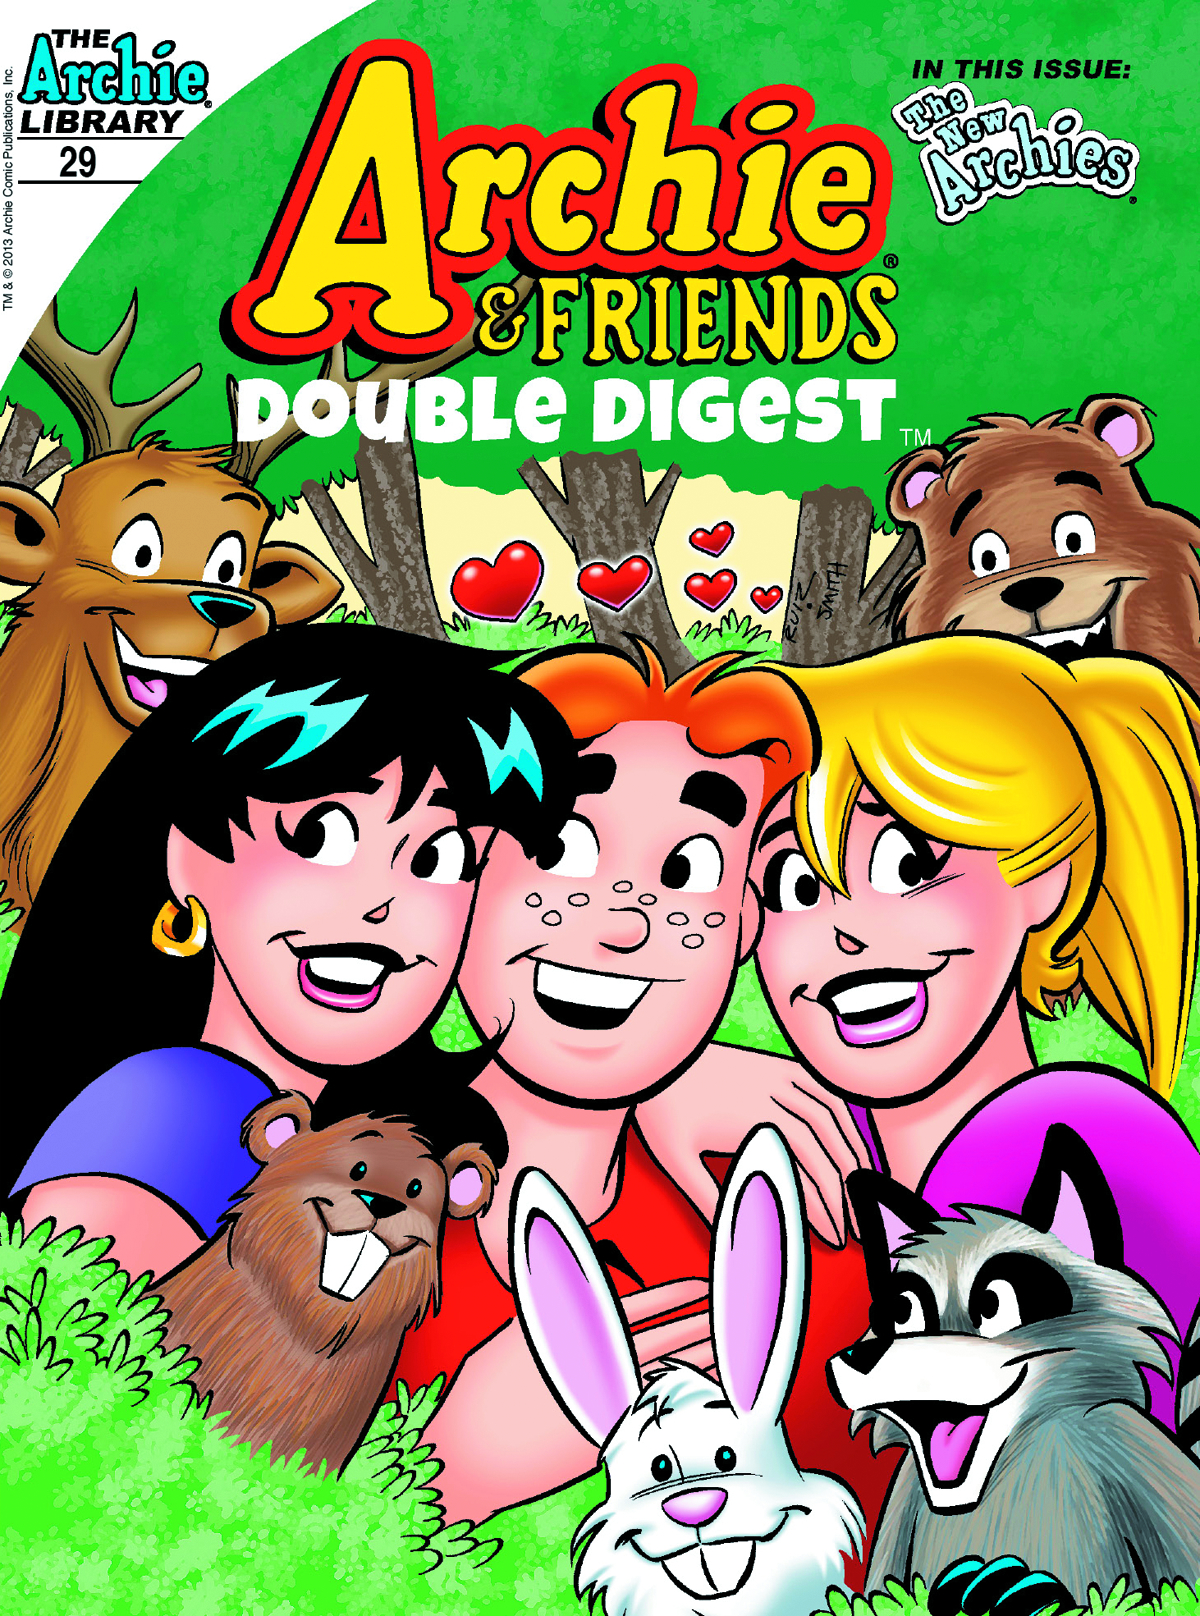 Archie and friends. Archie and friends Comics. Дабл френд. Archie animal. Friends issues